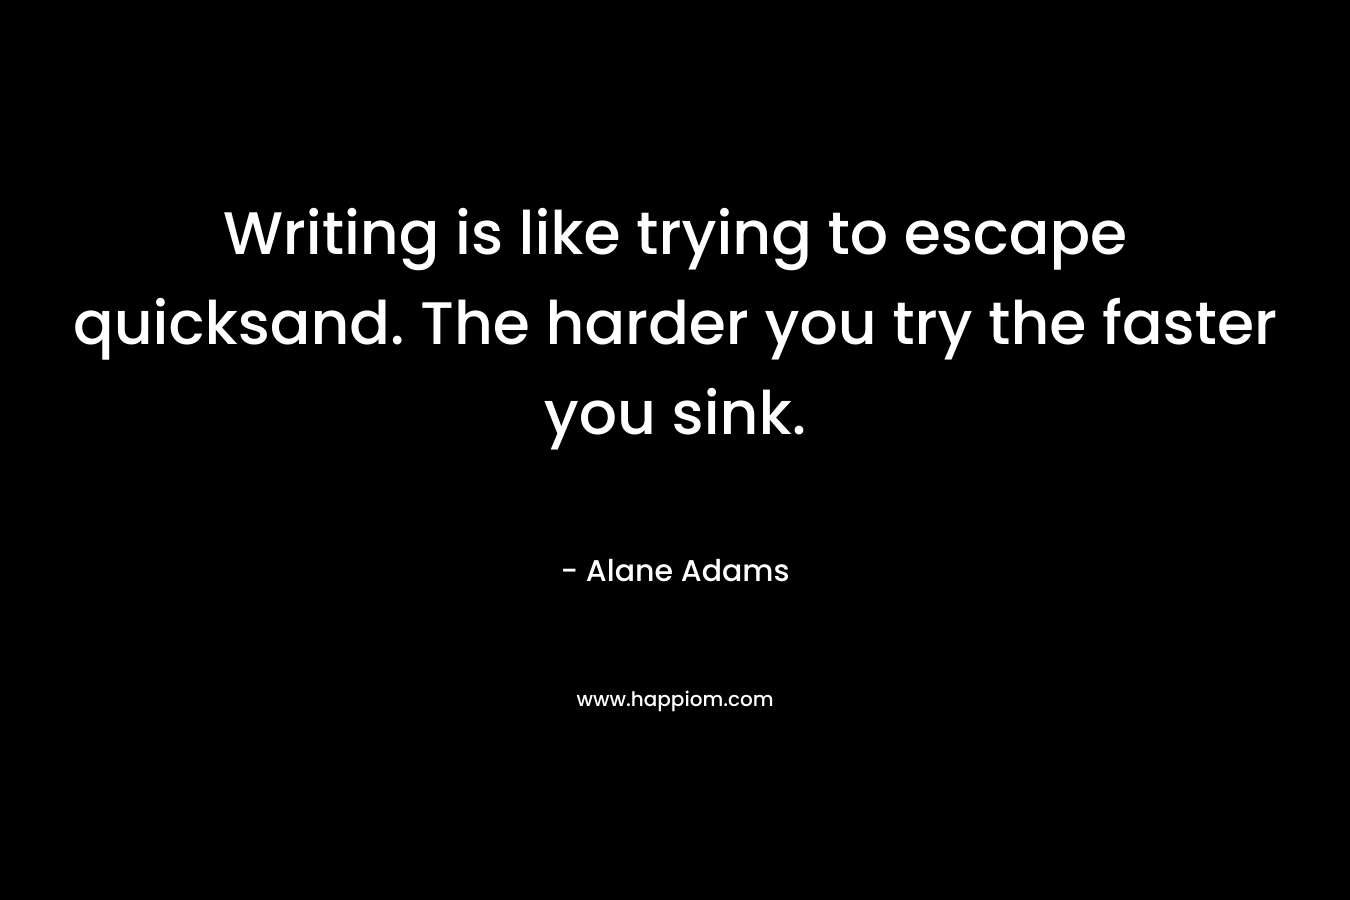 Writing is like trying to escape quicksand. The harder you try the faster you sink. – Alane Adams